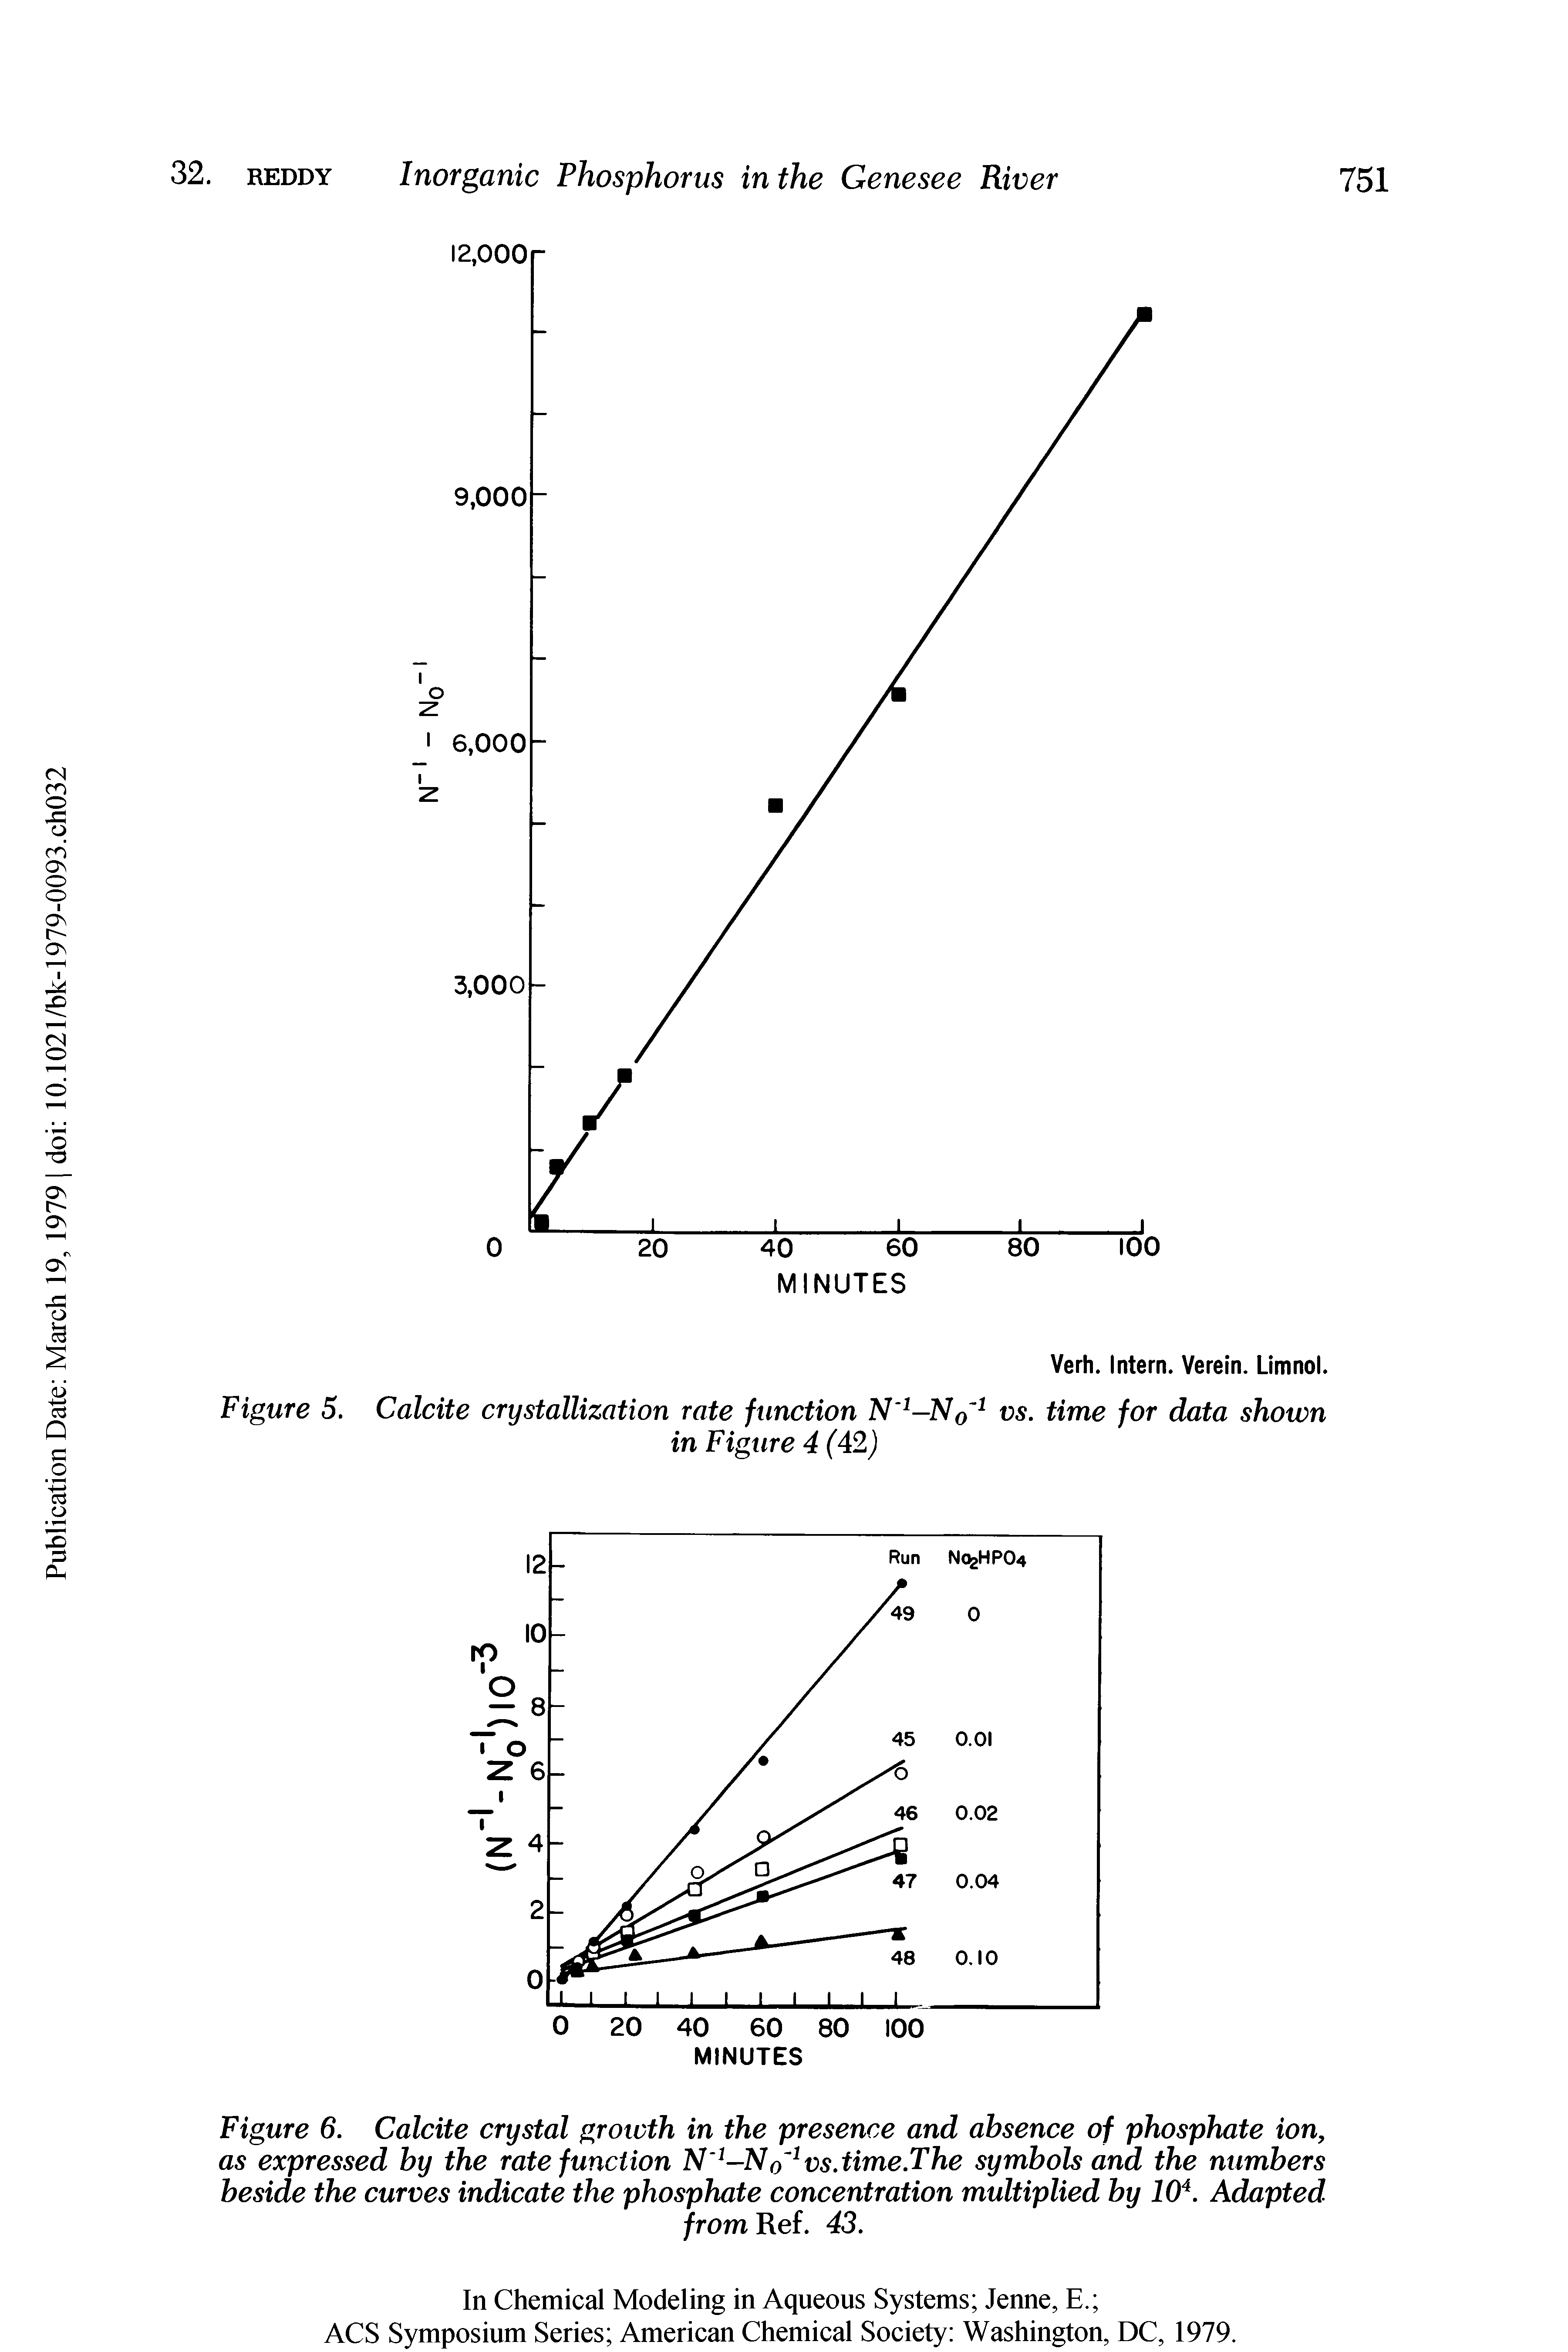 Figure 6. Calcite crystal groioth in the presence and absence of phosphate ion, as expressed by the rate function N -No vs.time.The symbols and the numbers beside the curves indicate the phosphate concentration multiplied by 10. Adapted...